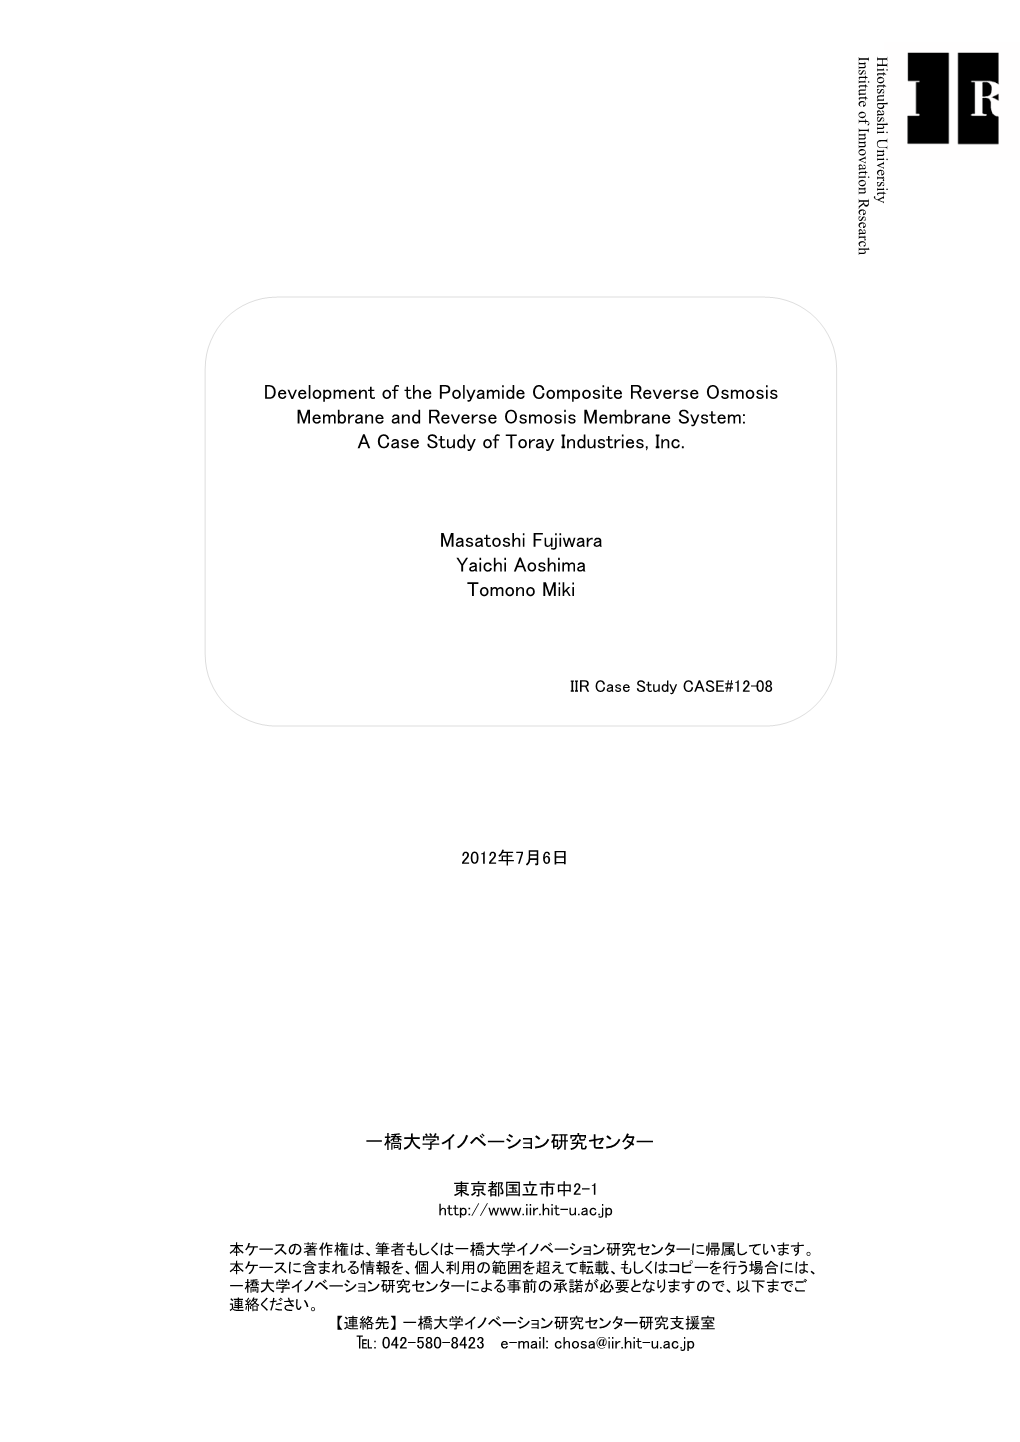 Development of the Polyamide Composite Reverse Osmosis Membrane and Reverse Osmosis Membrane System: a Case Study of Toray Industries, Inc